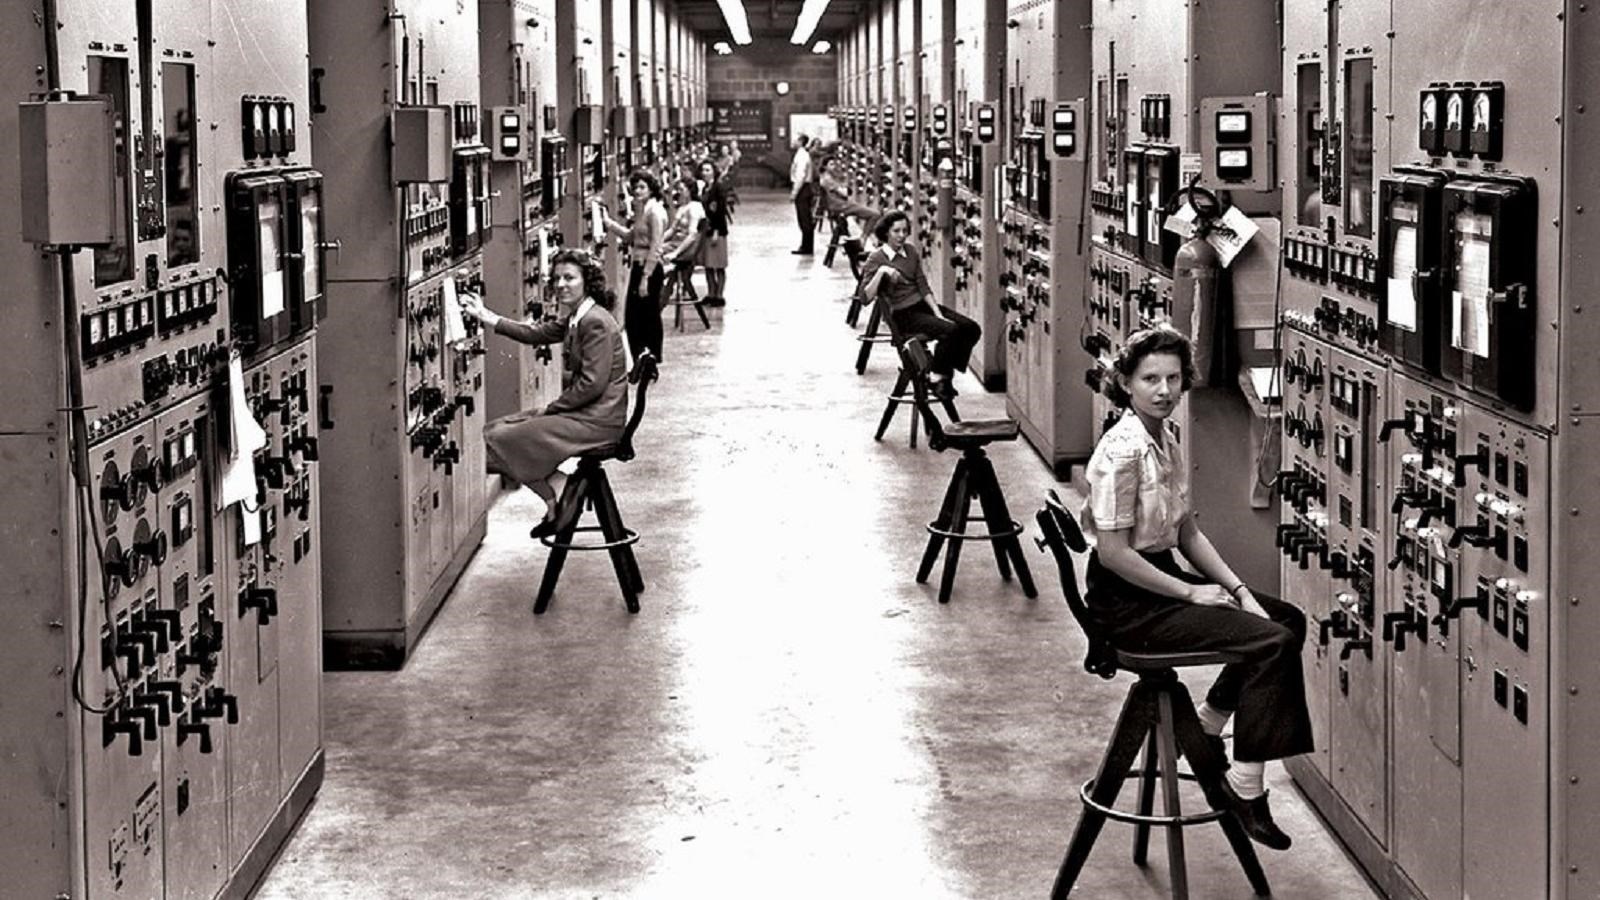 women sitting on stools in a large room working on very large mainframe computers